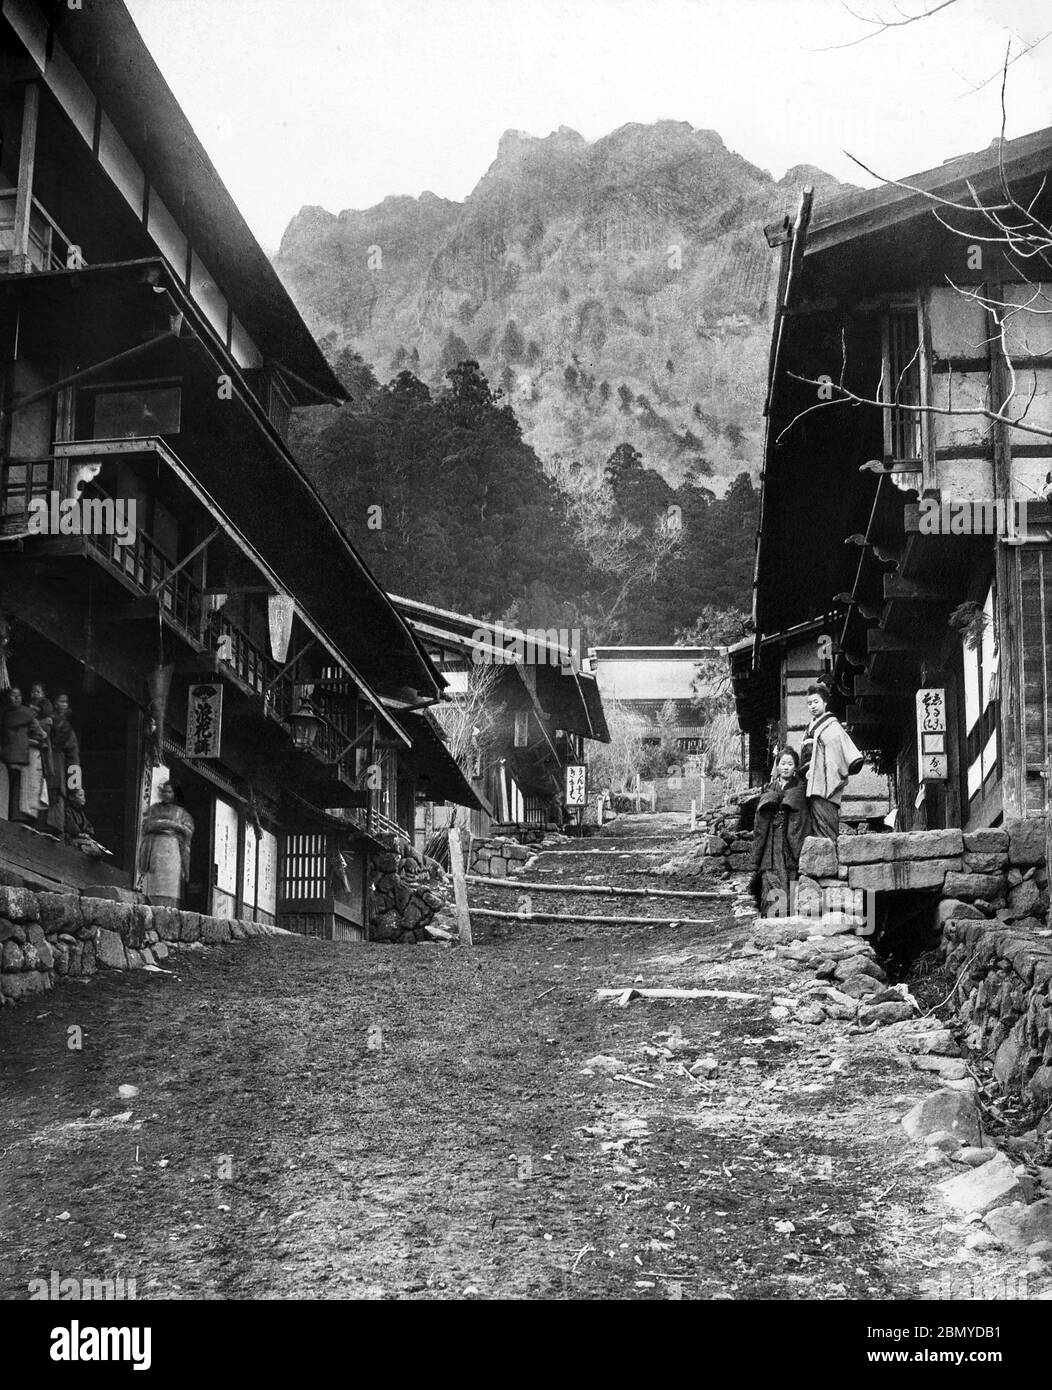 [ 1890s Japan - Japanese Mountain Town ] —   A rare view of Japanese inns along the road to Myogi Shrine (妙義神社) in Tomioka (富岡市), Gunma Prefecture. In the background Mount Myogi (妙義山) can be seen. The area was near the Nakasendo, one of the two routes that connected Edo (modern-day Tokyo) to Kyoto.  Mt. Myogi is one of the Three Great Places of Rugged Beauty in Japan (日本三大奇勝, Nihon Sandai Kisho). The other two are Yabakei Gorge (耶馬溪) in Kyushu and Kankakei Gorge (寒霞渓) in Shikoku.  From a series of glass slides published (but not photographed) by Scottish photographer George Washington Wilson ( Stock Photo